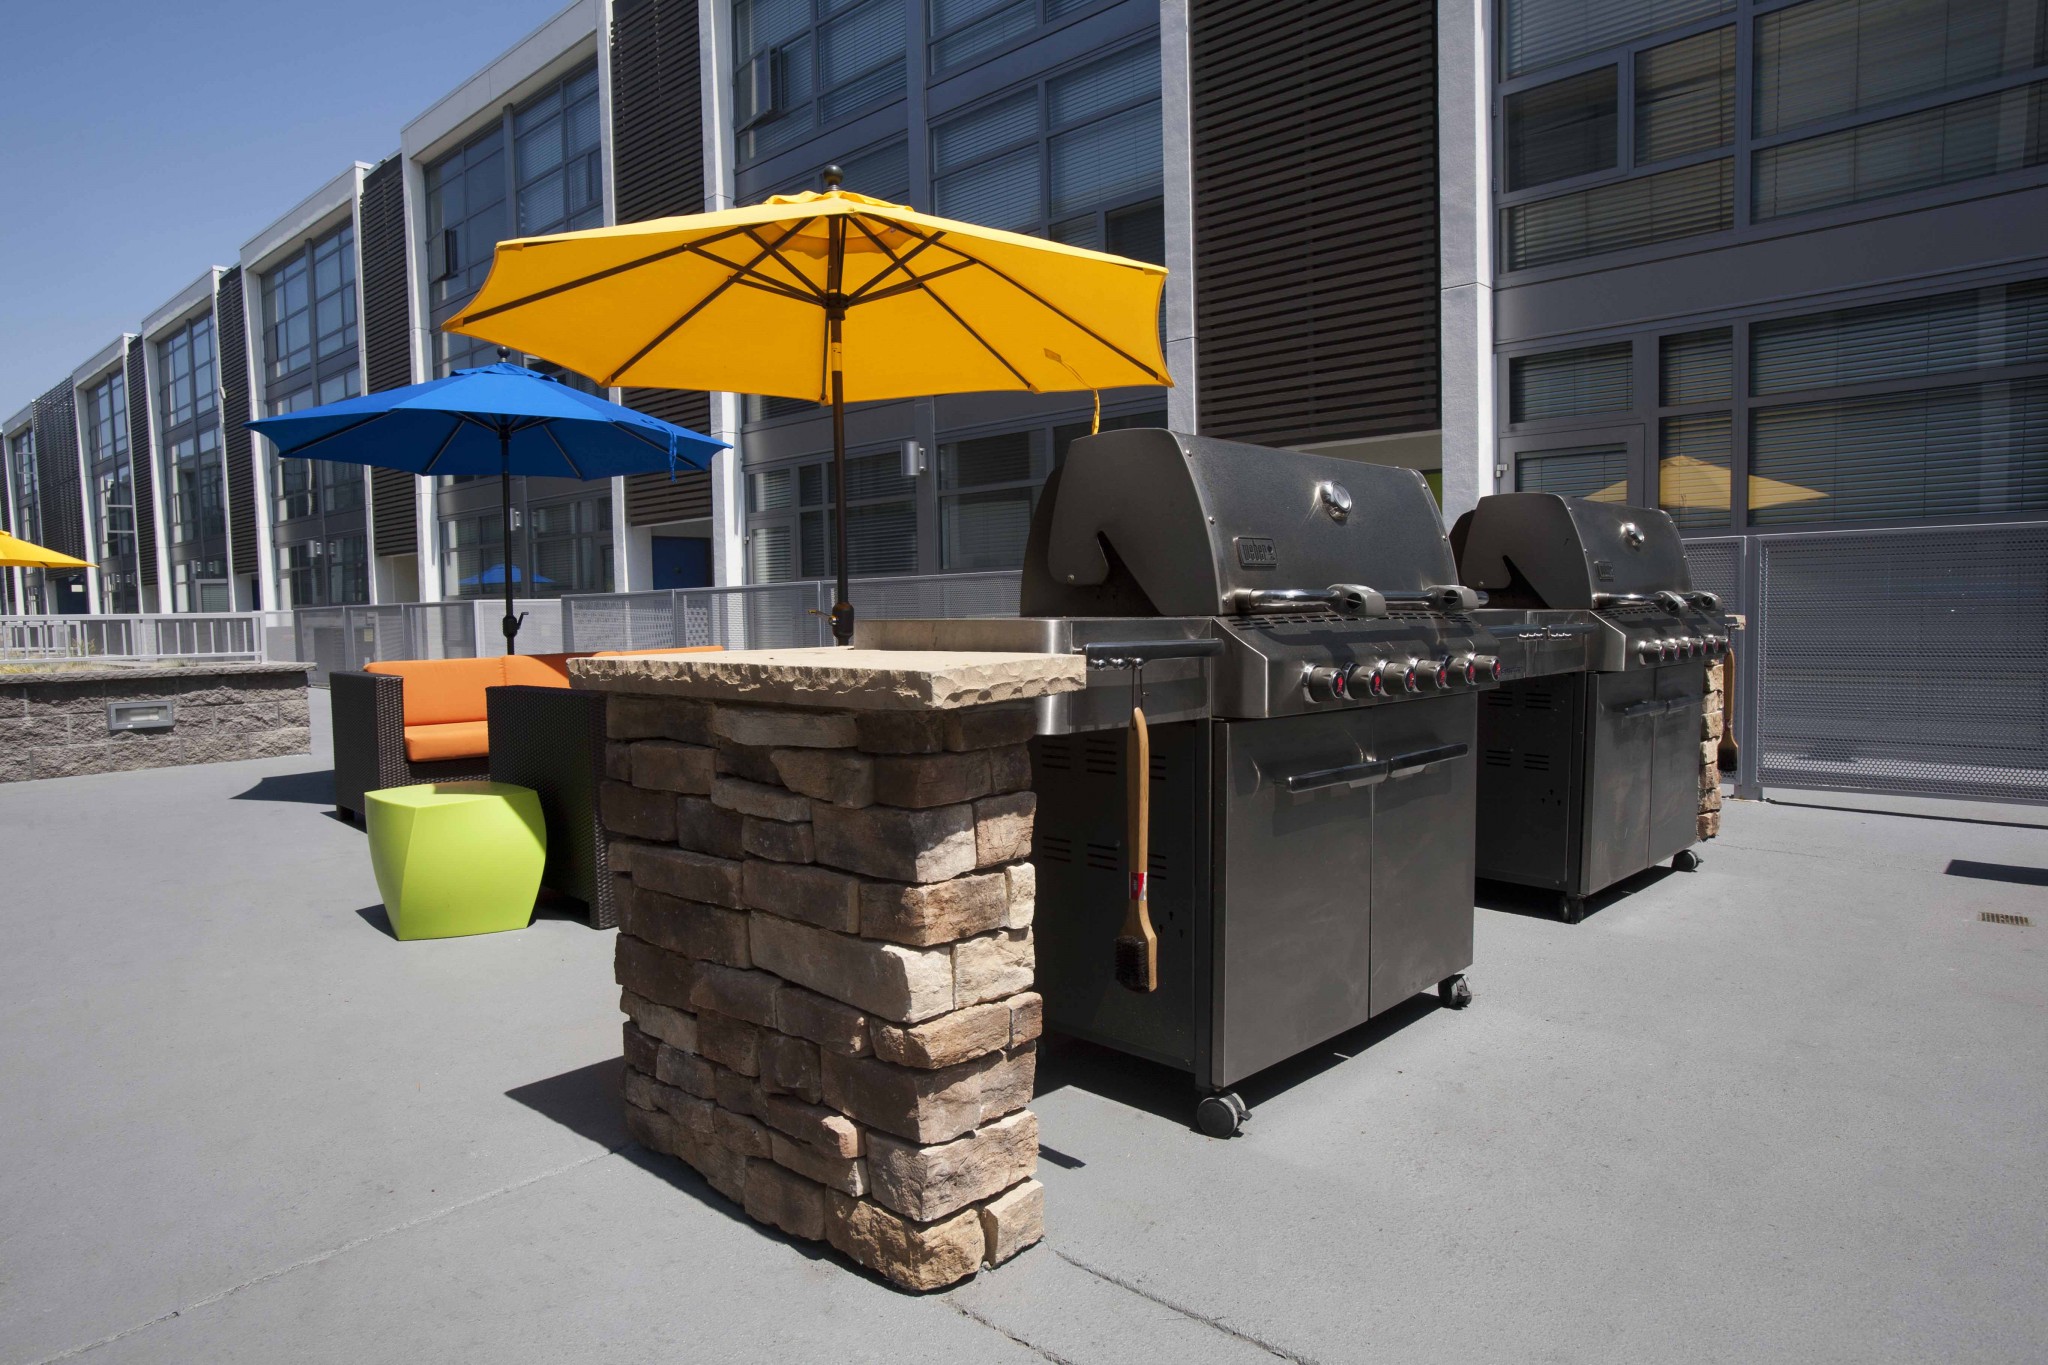 Close up of BBQ grills in the courtyard. with umbrellas in the background.